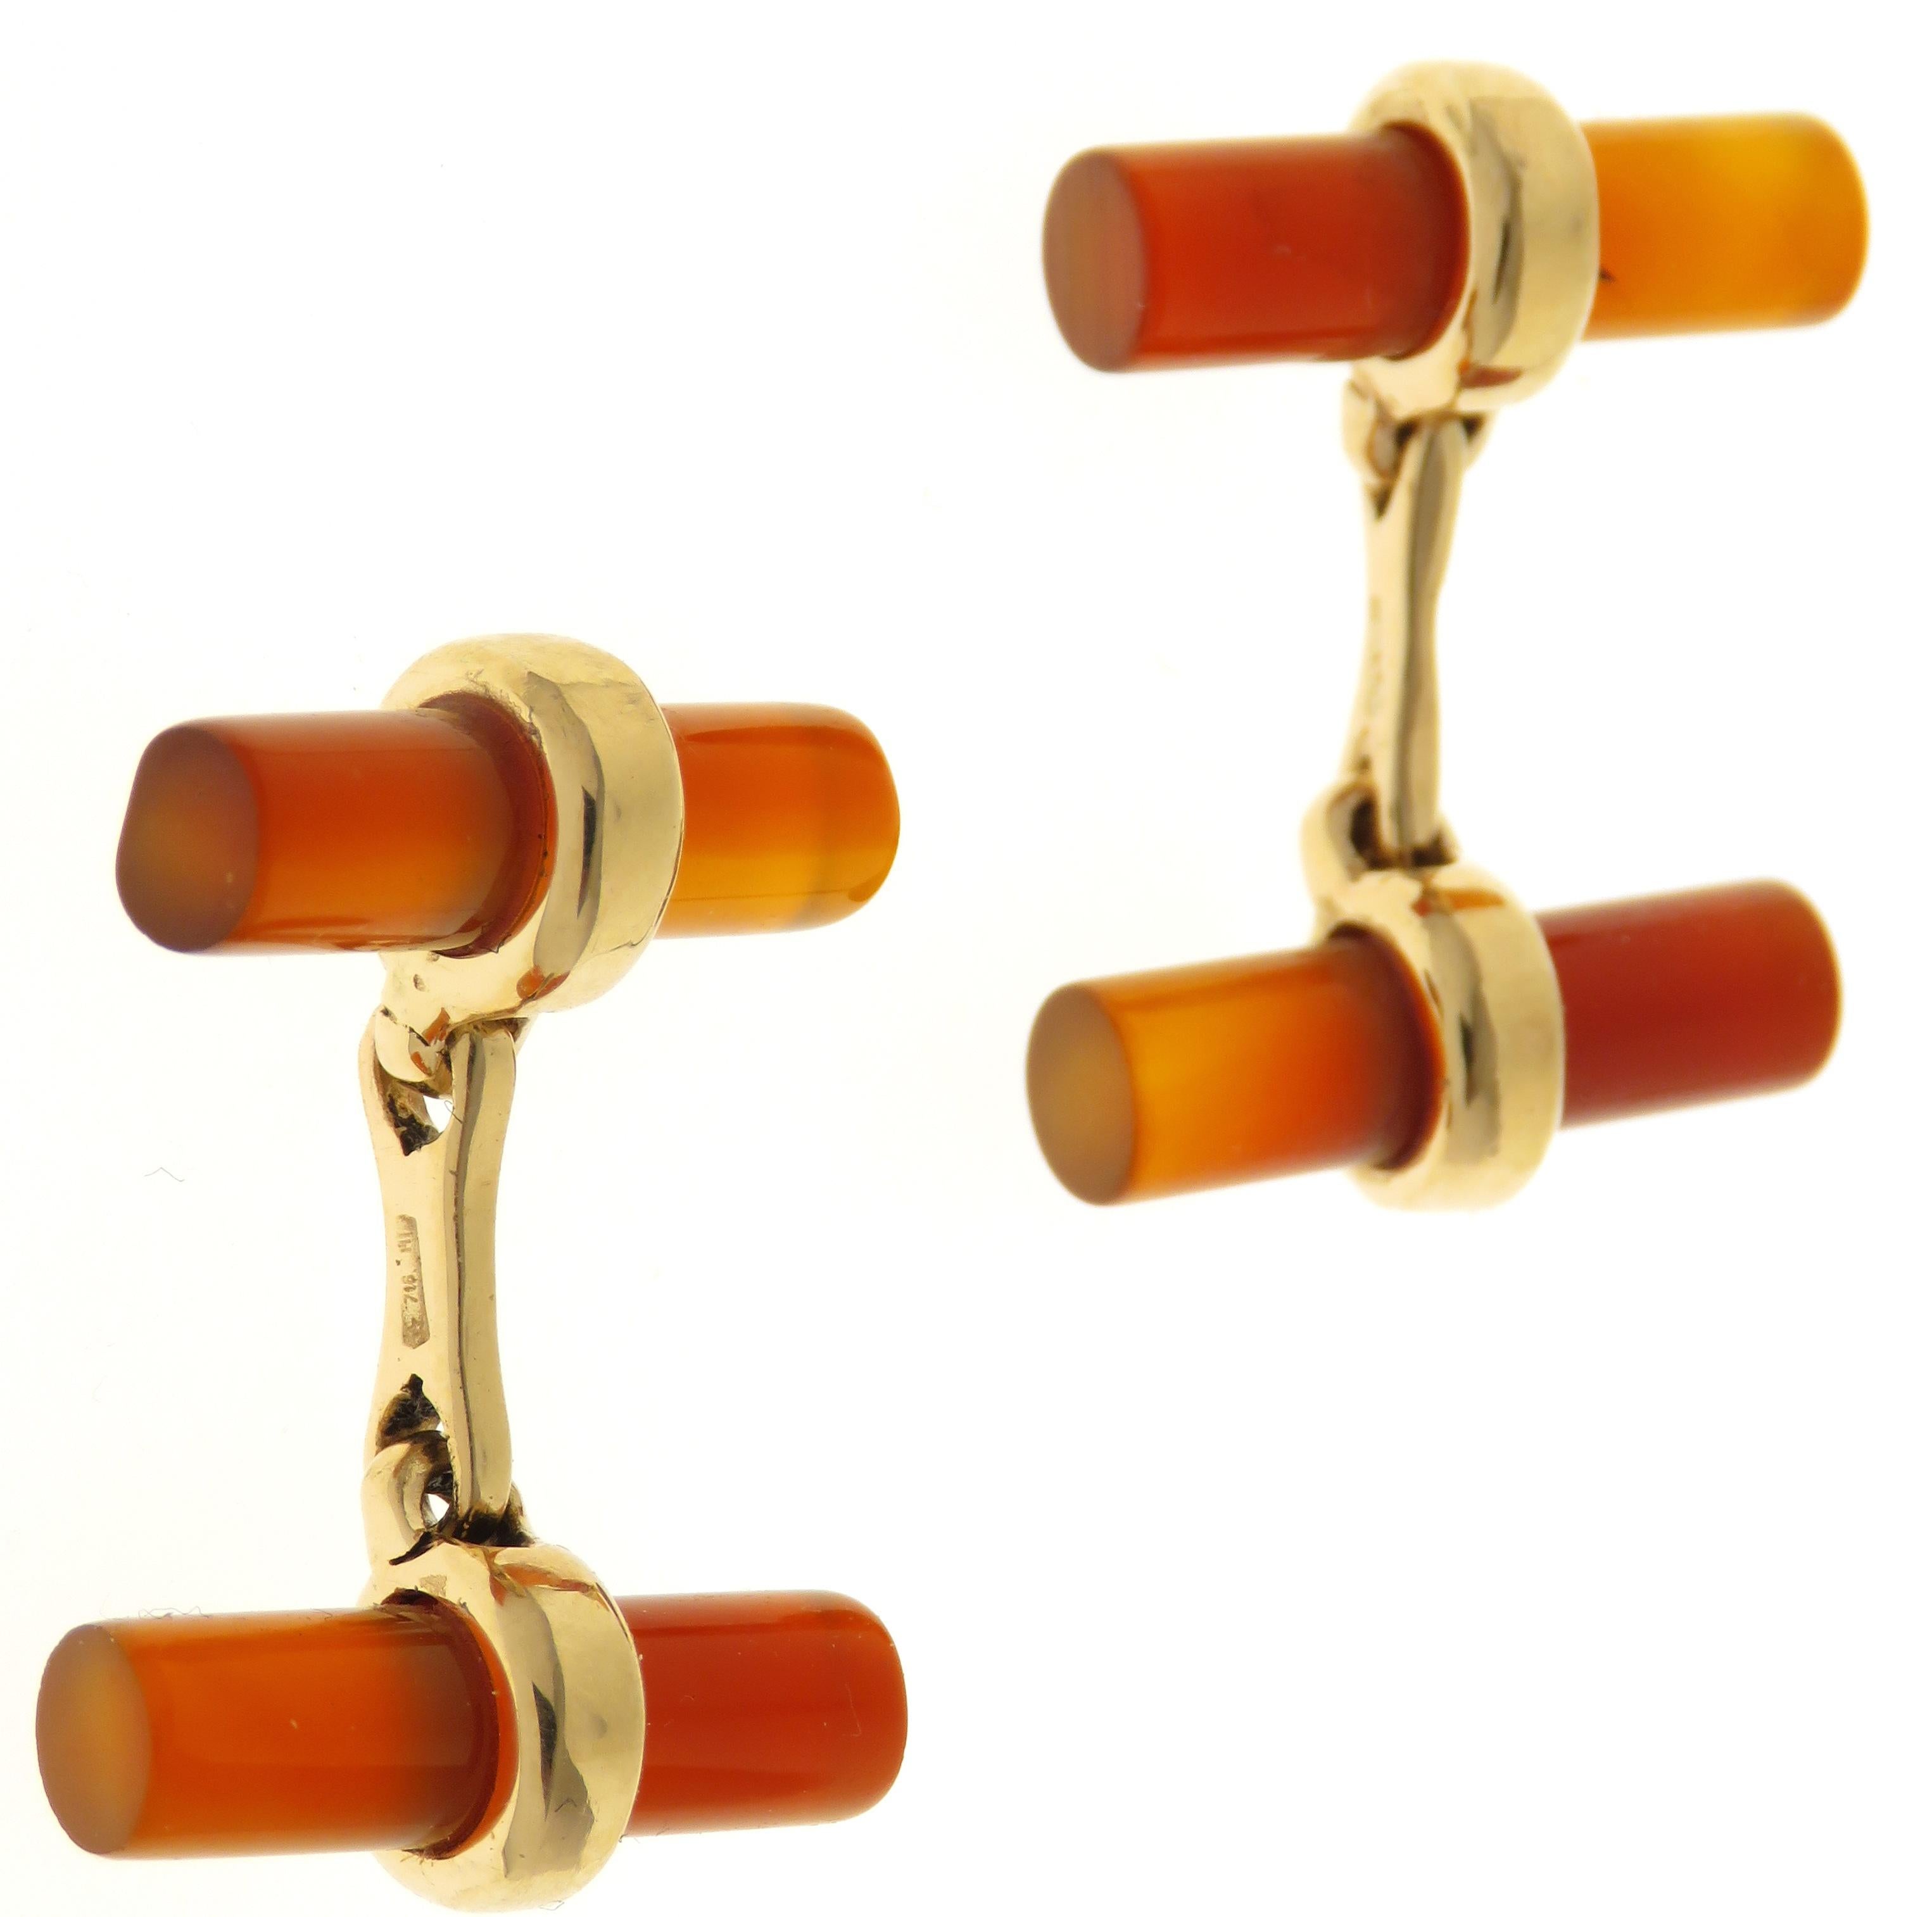 Contemporary Red Carnelian 9 Karat Rose Gold Bar Cufflinks Handcrafted in Italy